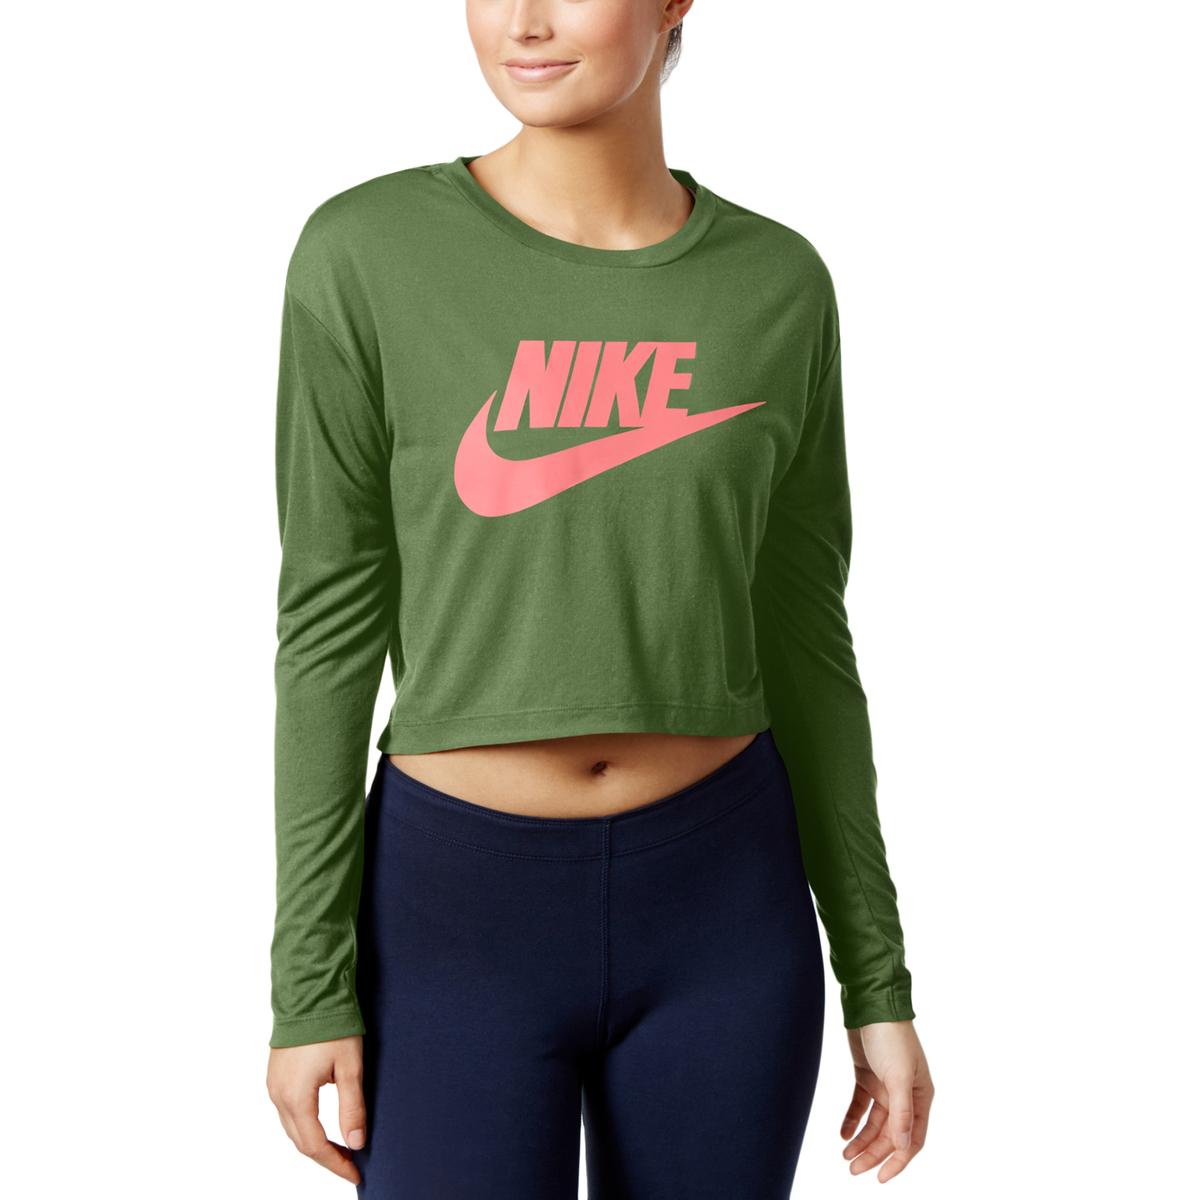 Nike Womens Cropped Fitness Shirts & Tops